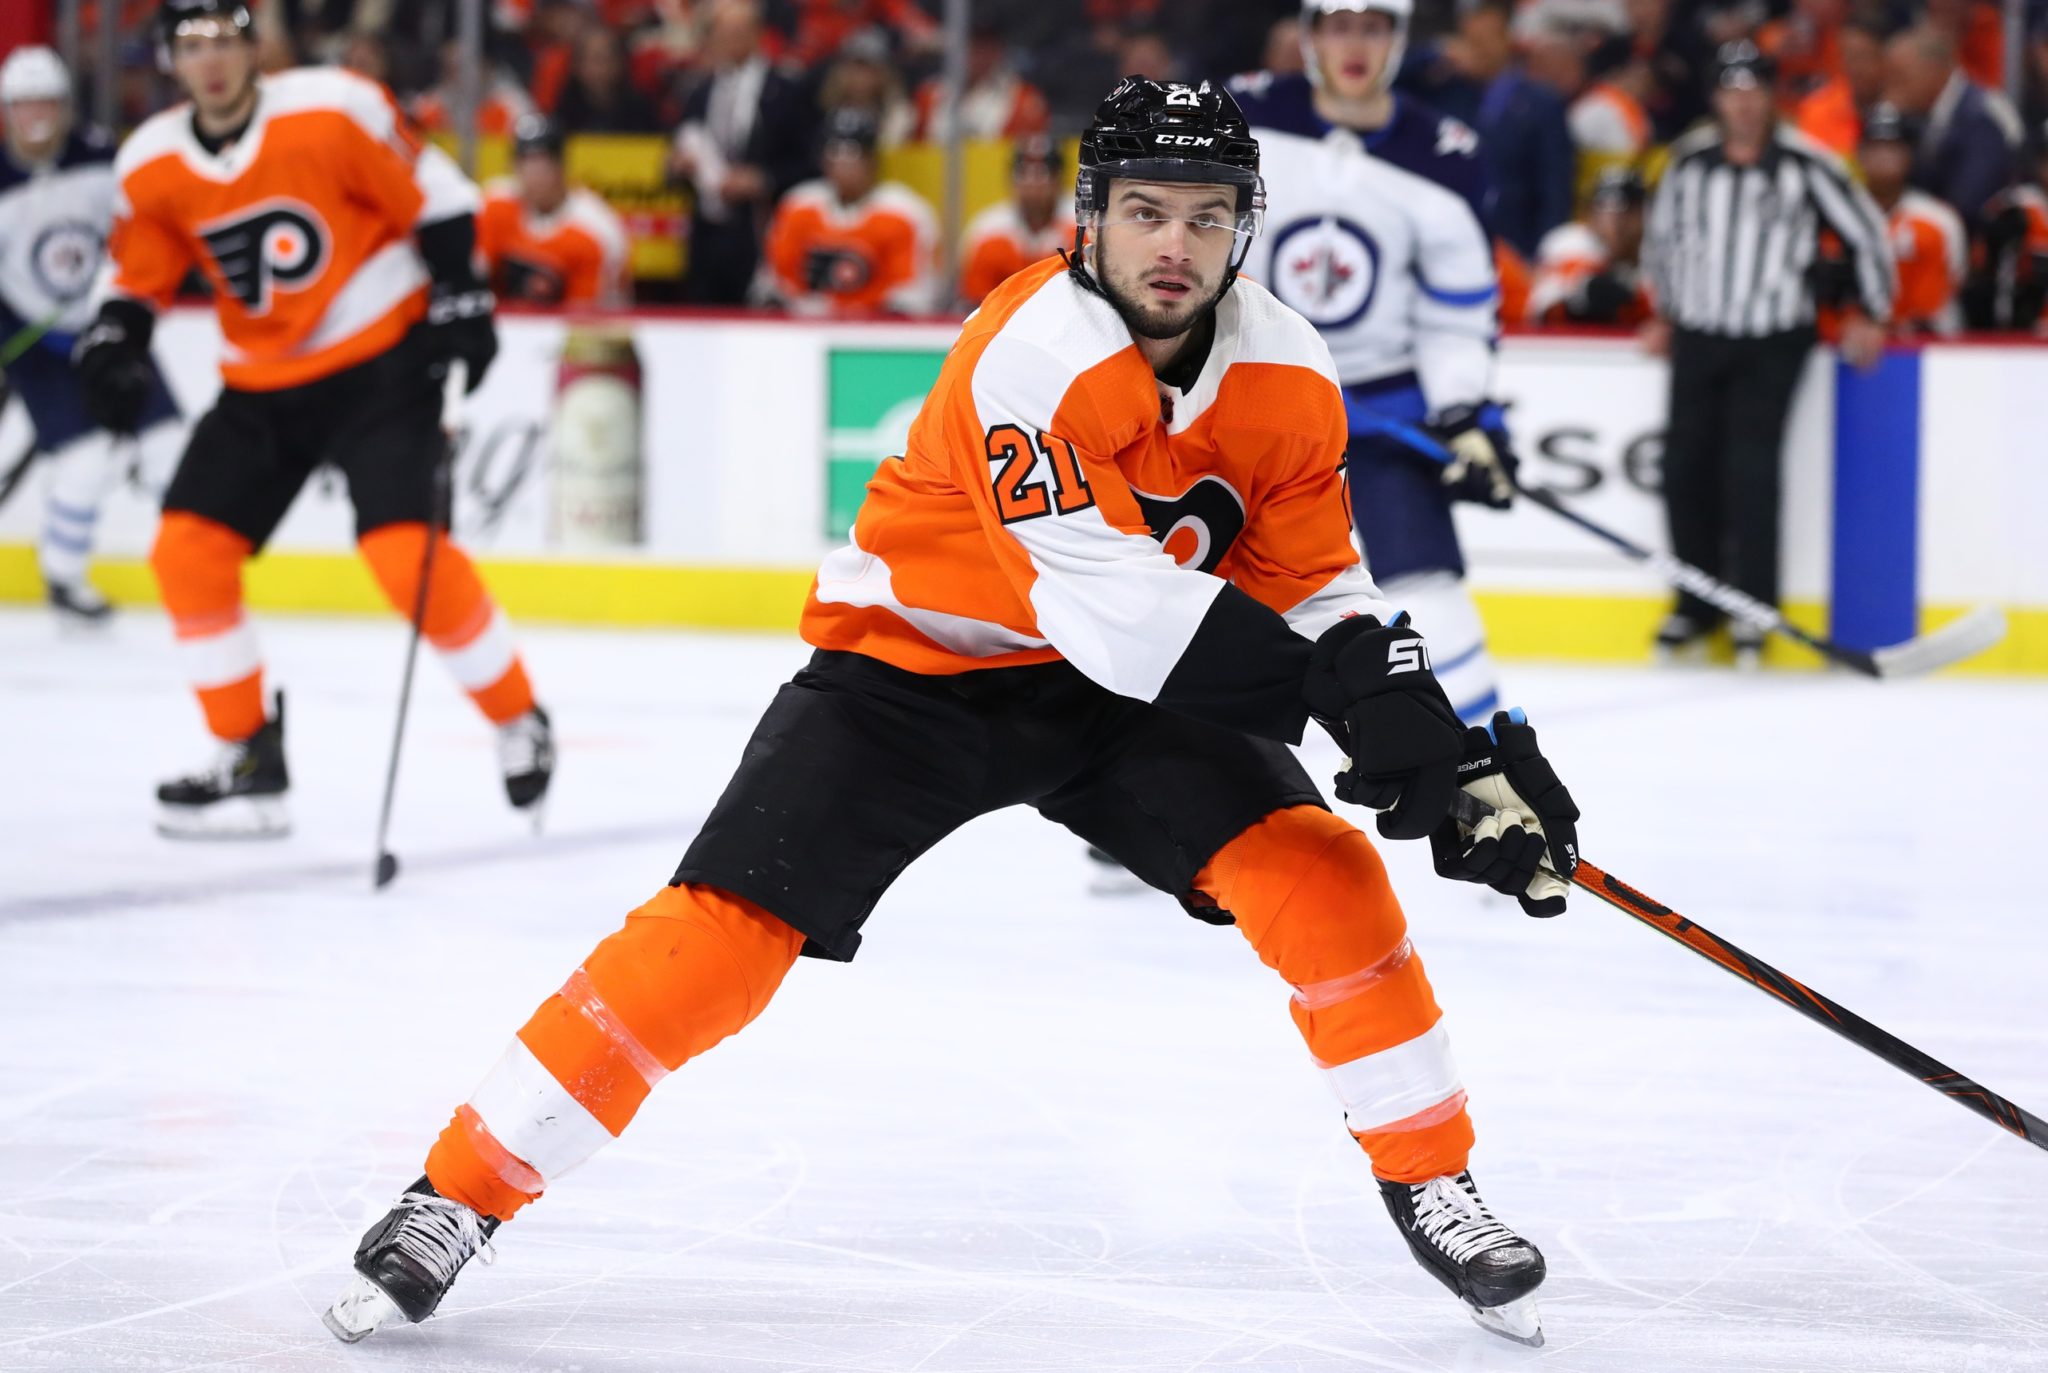 A Laught of Positives: 5 Takeaways from the Flyers’ 4-2 Win